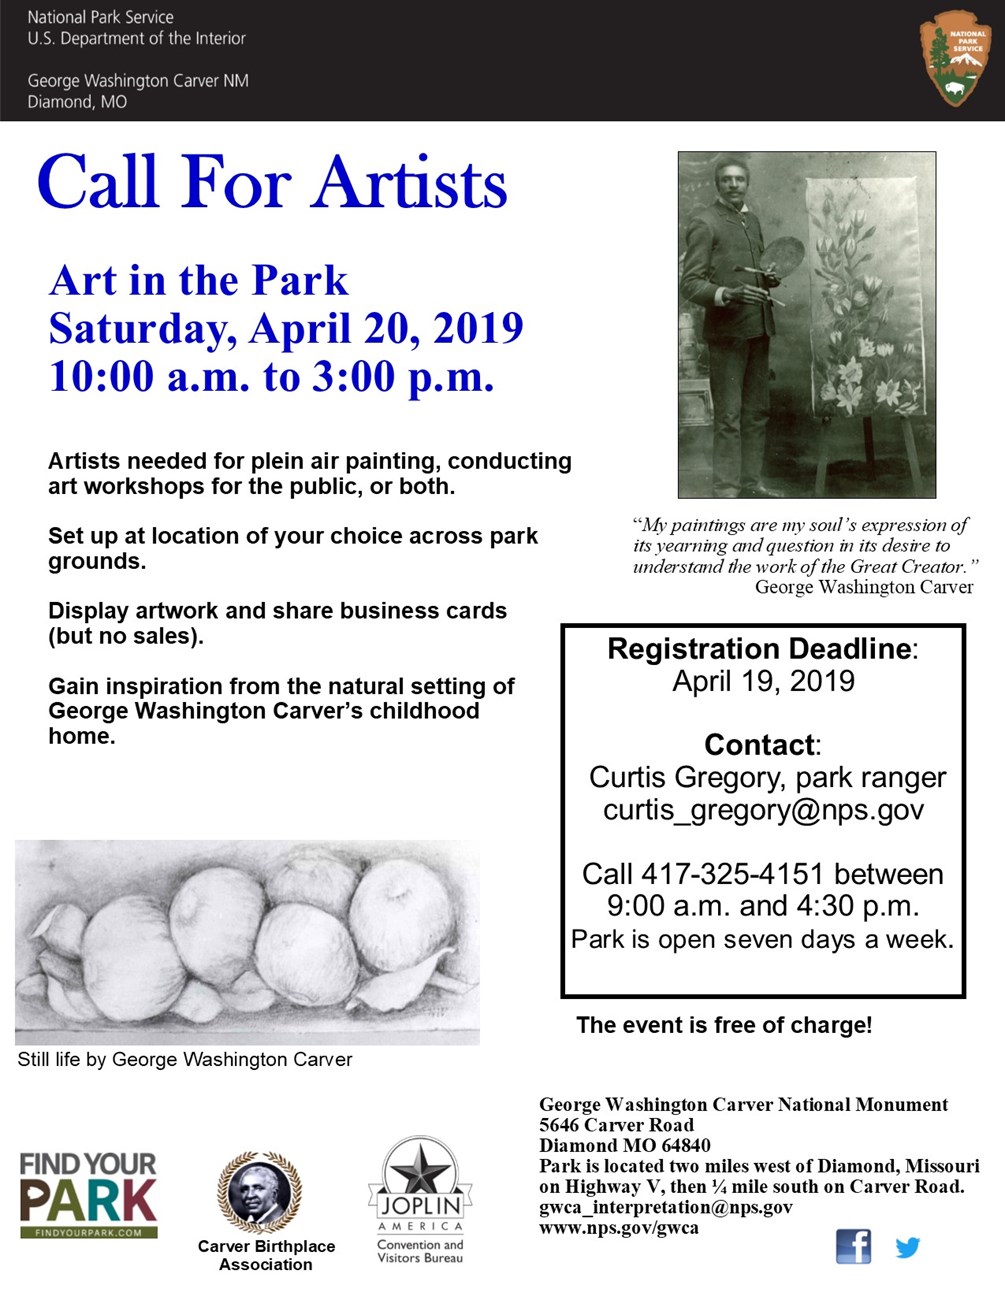 The photo is a poster for Call for Artists for Art in the Park special event. Additional images of Carver and his artwork as well as information text is included.